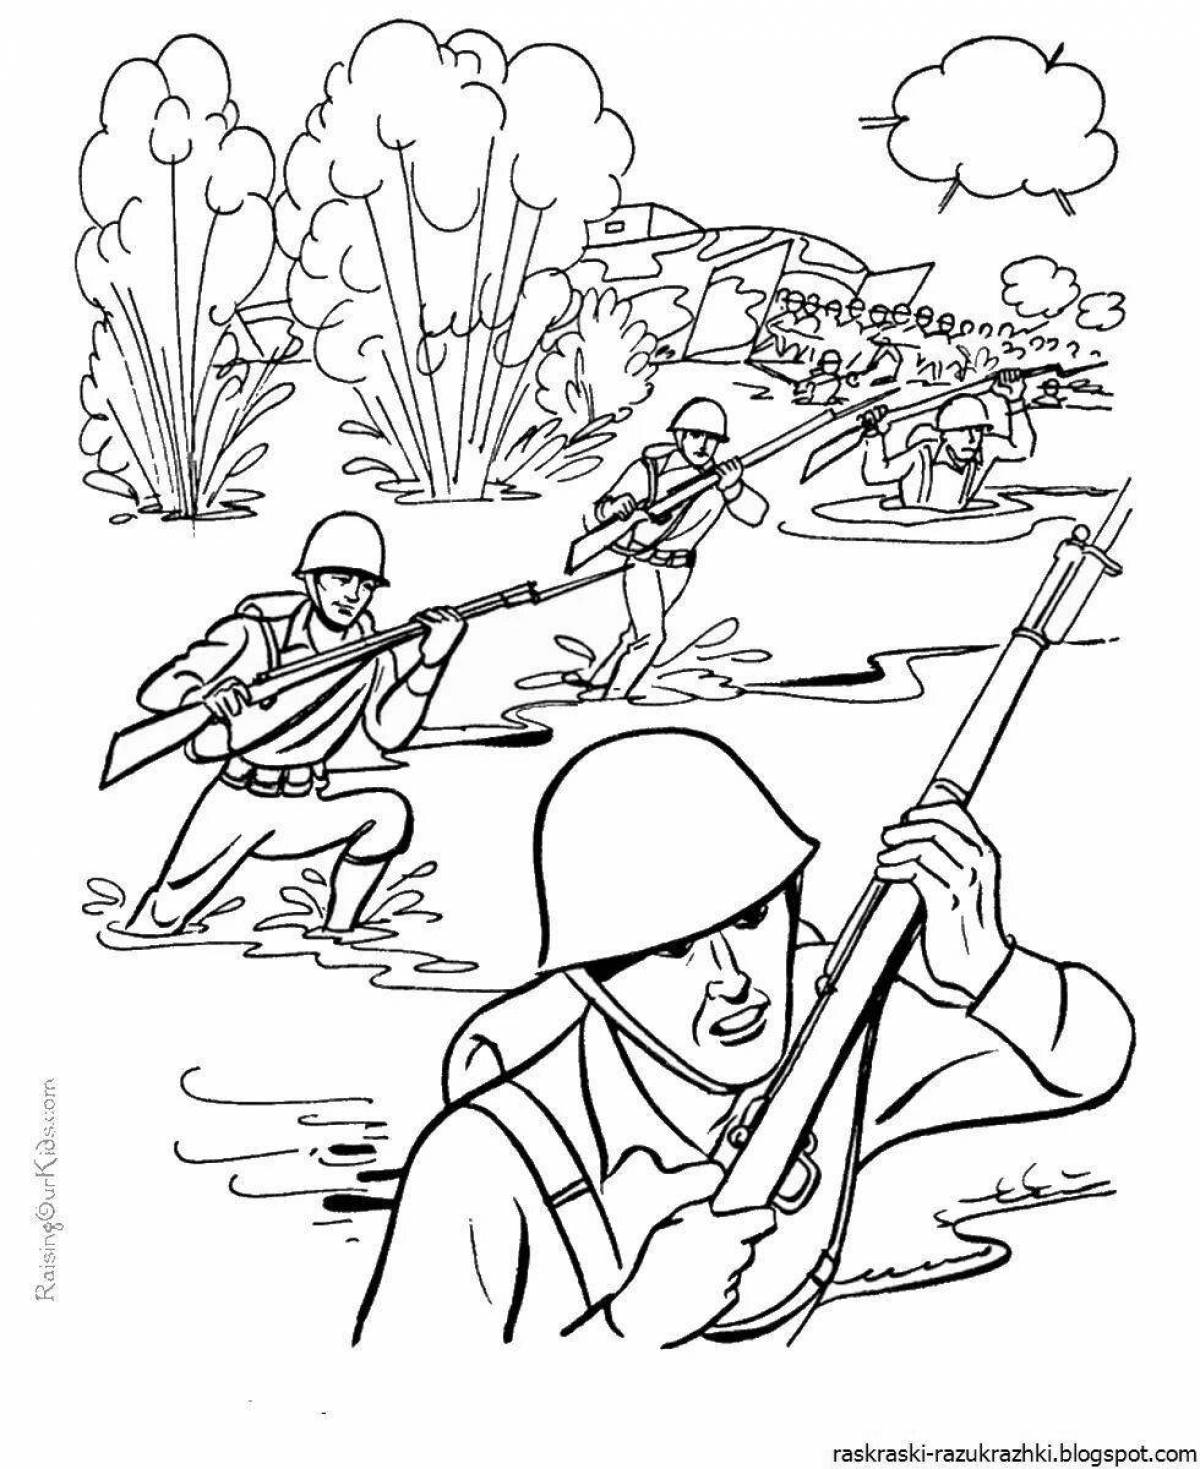 Colourful wow soldier coloring page